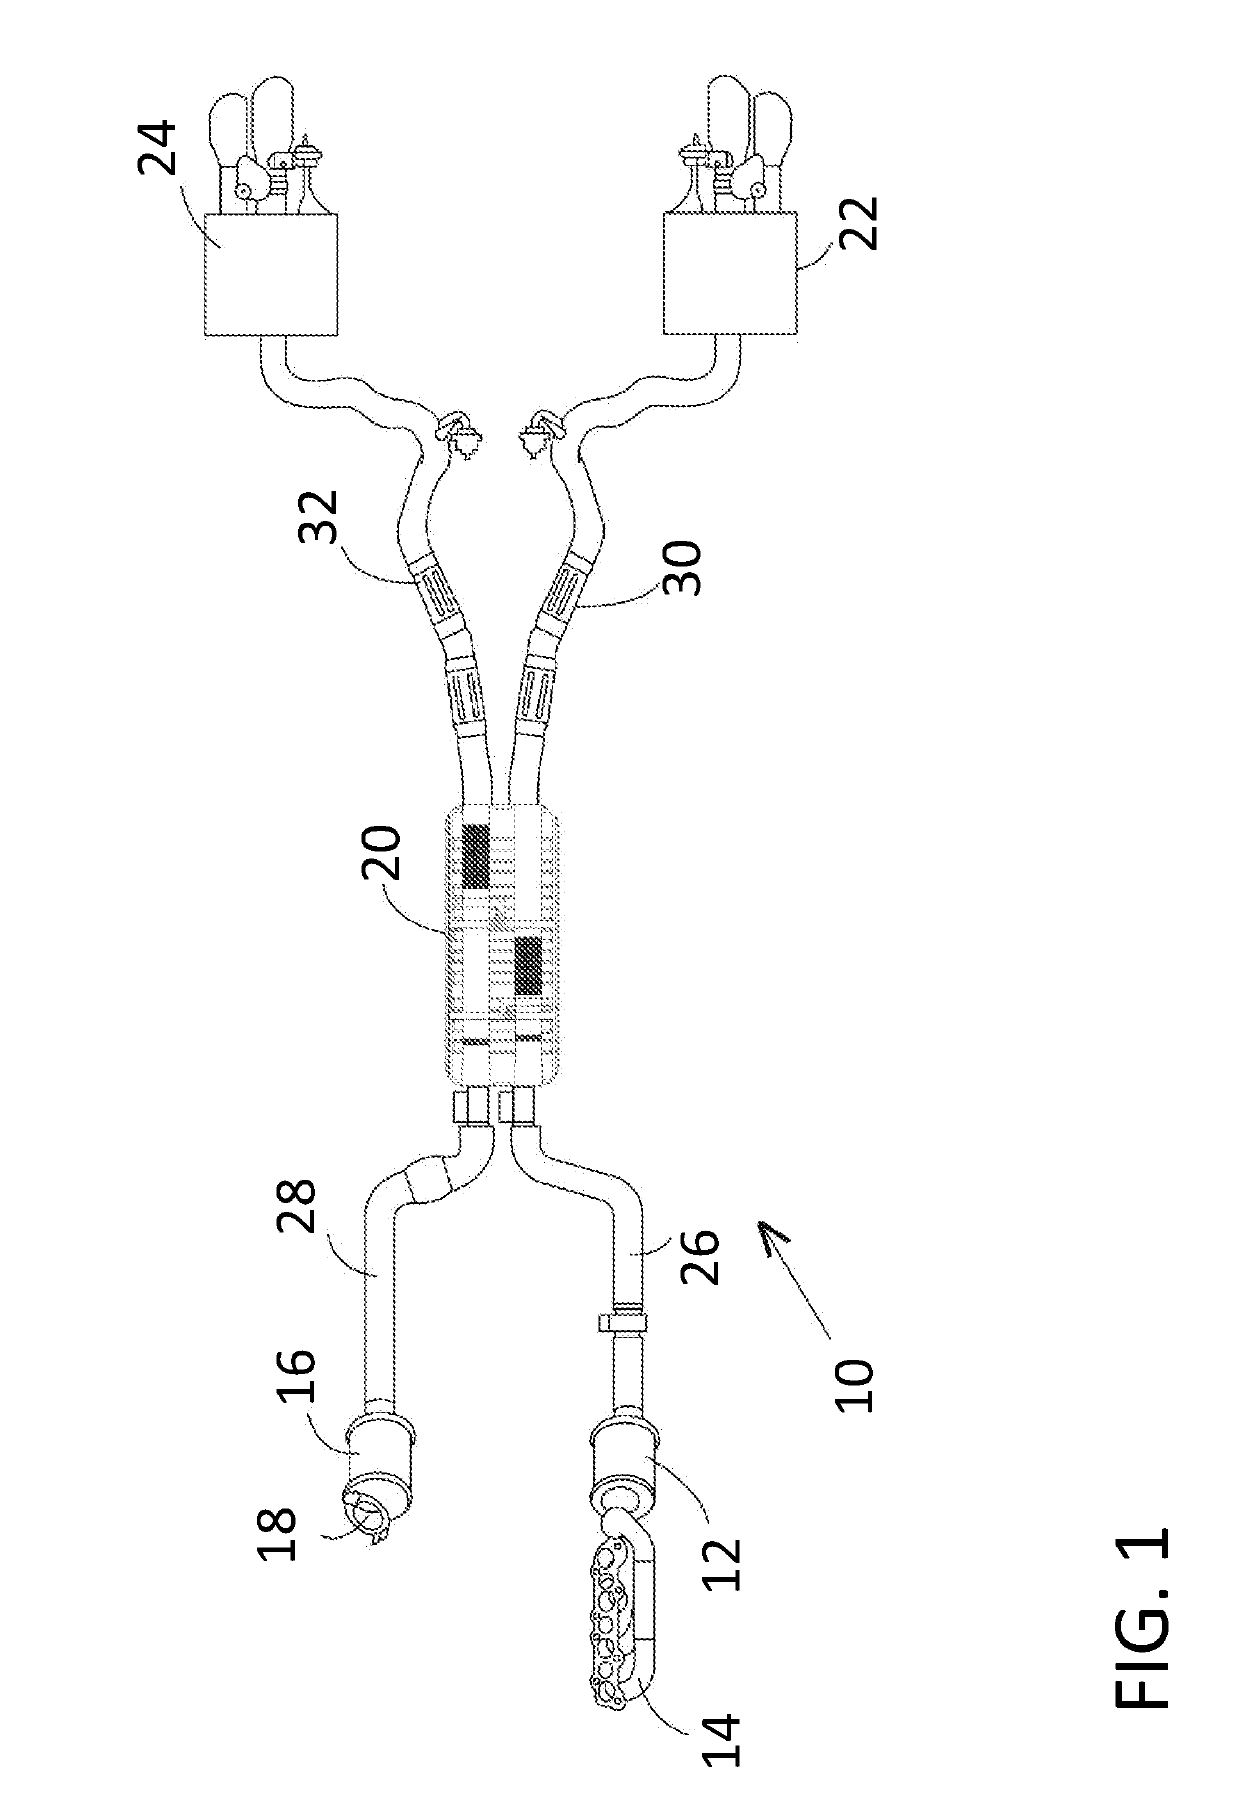 Exhaust system having tunable exhaust sound